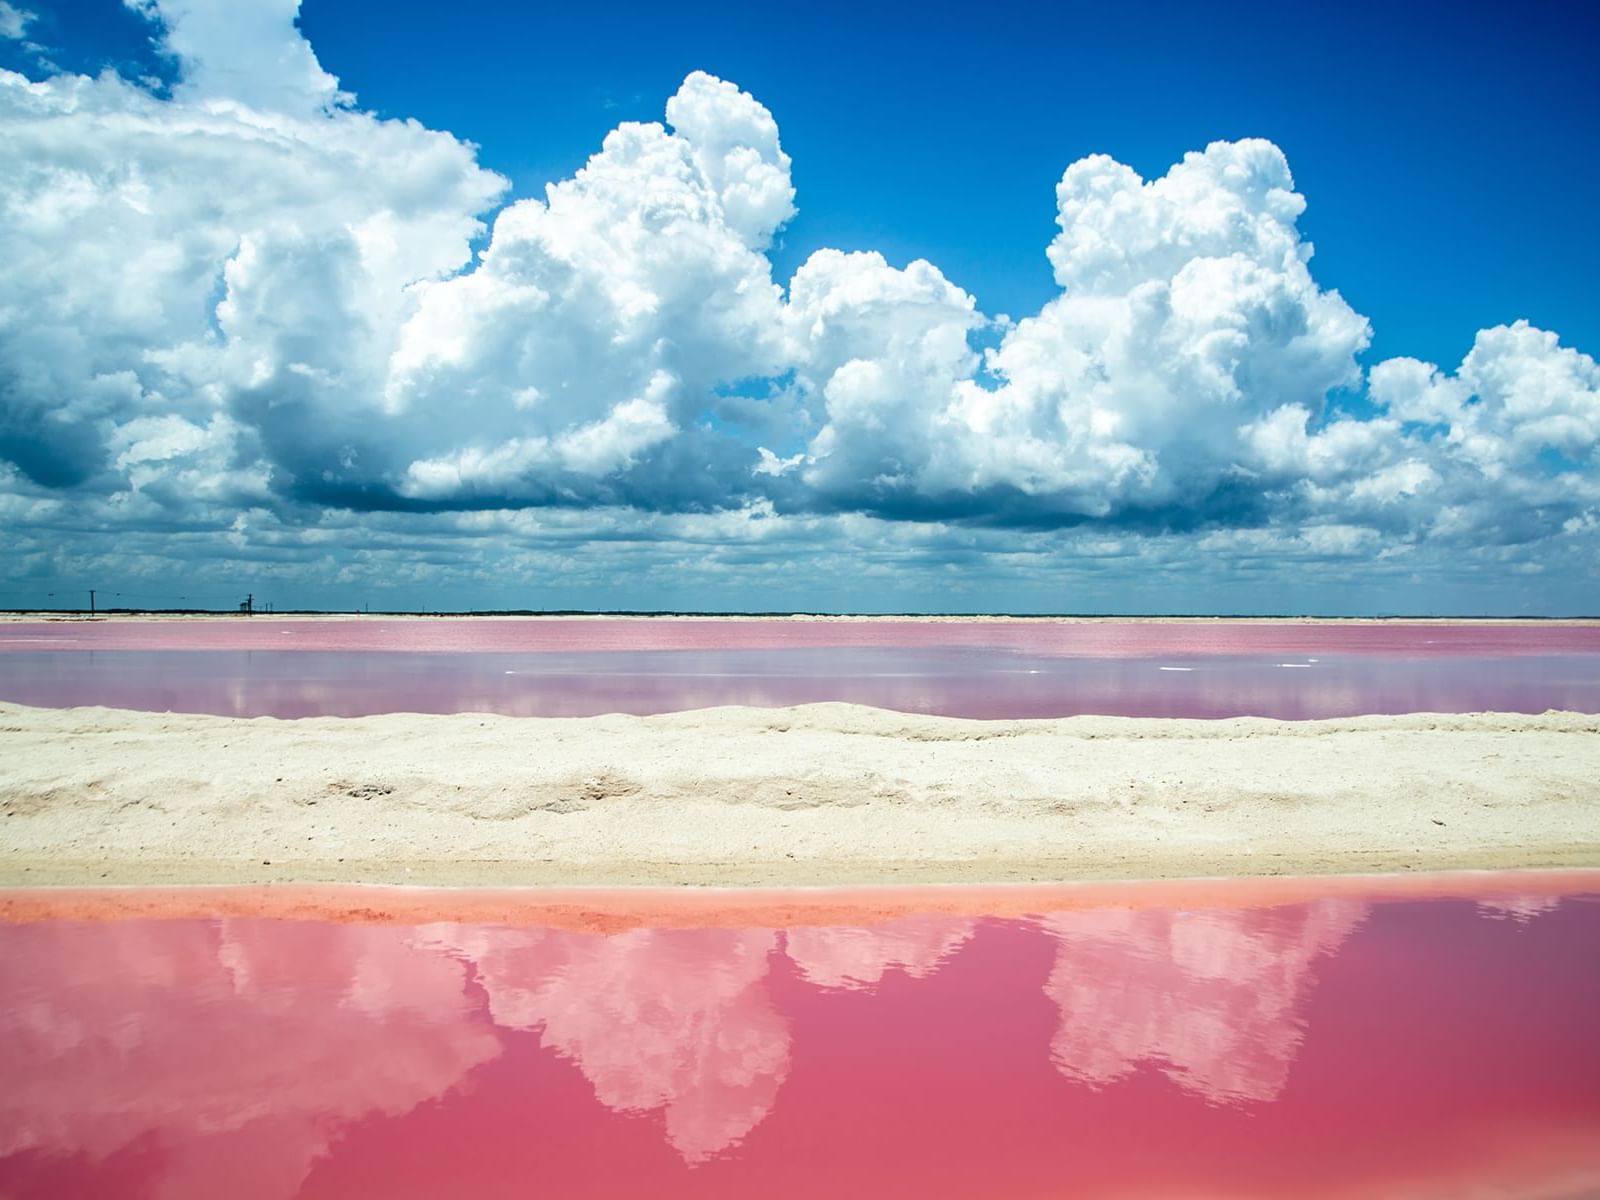 Pink salt lake and the blue sky with clouds, Fiesta Americana